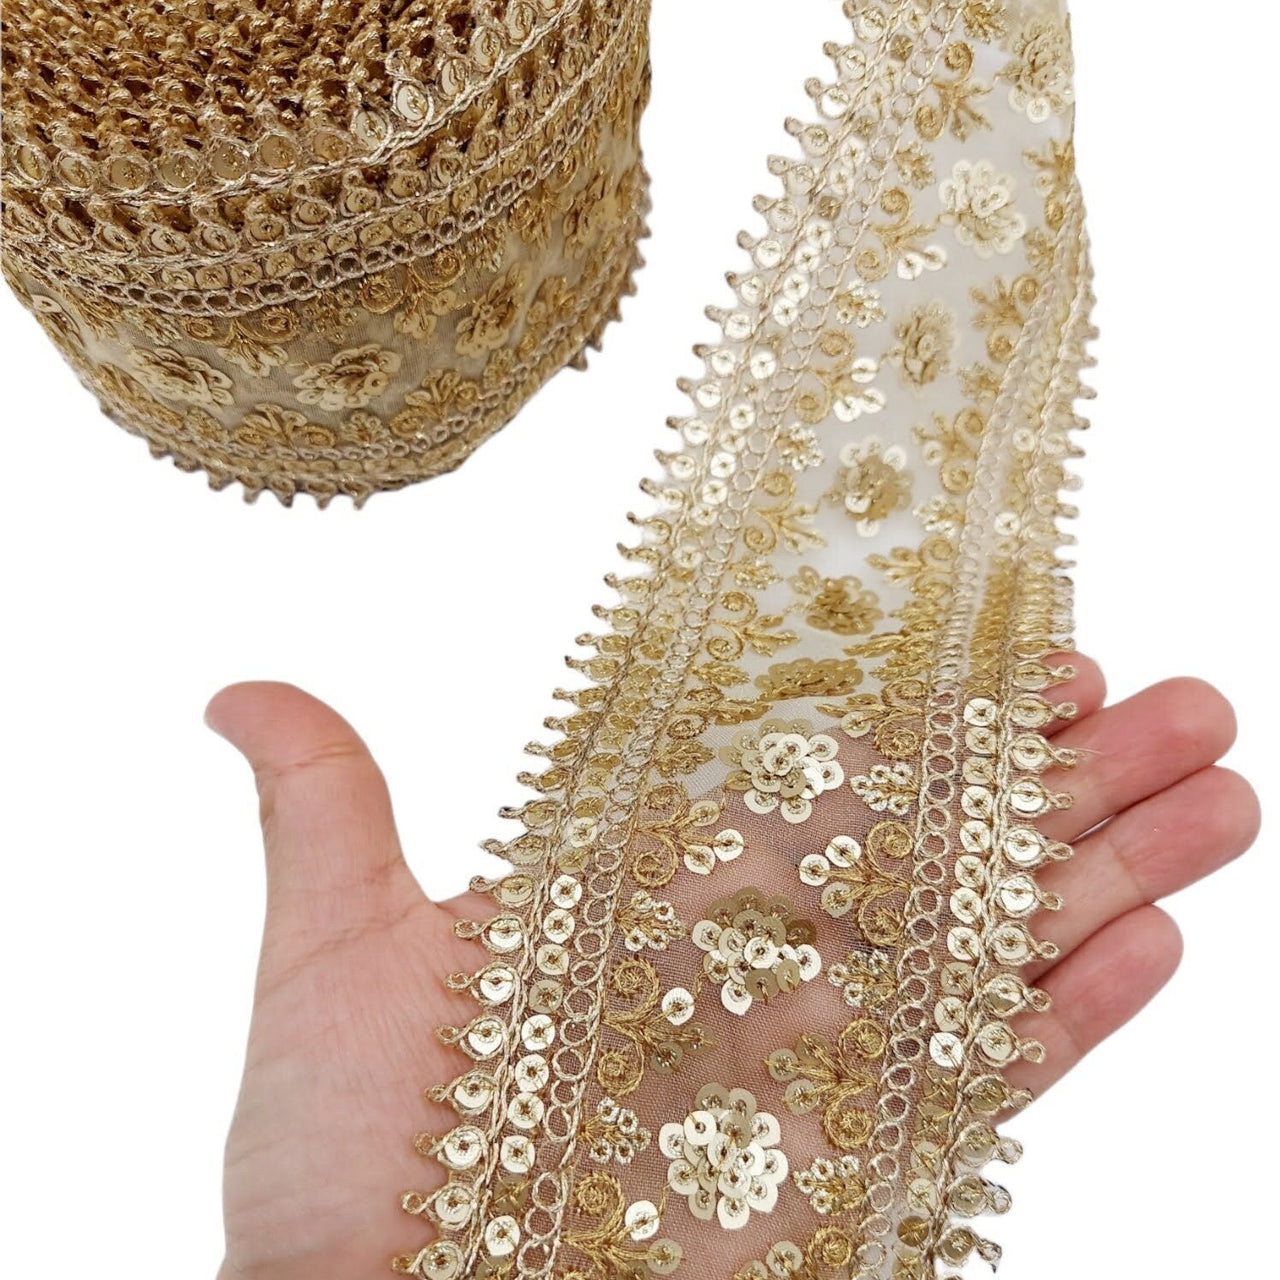 Gold Sequins Trim 2 Yards Decorative Embroidered Lace Sari Border Costume Ribbon Crafting Sewing Tape